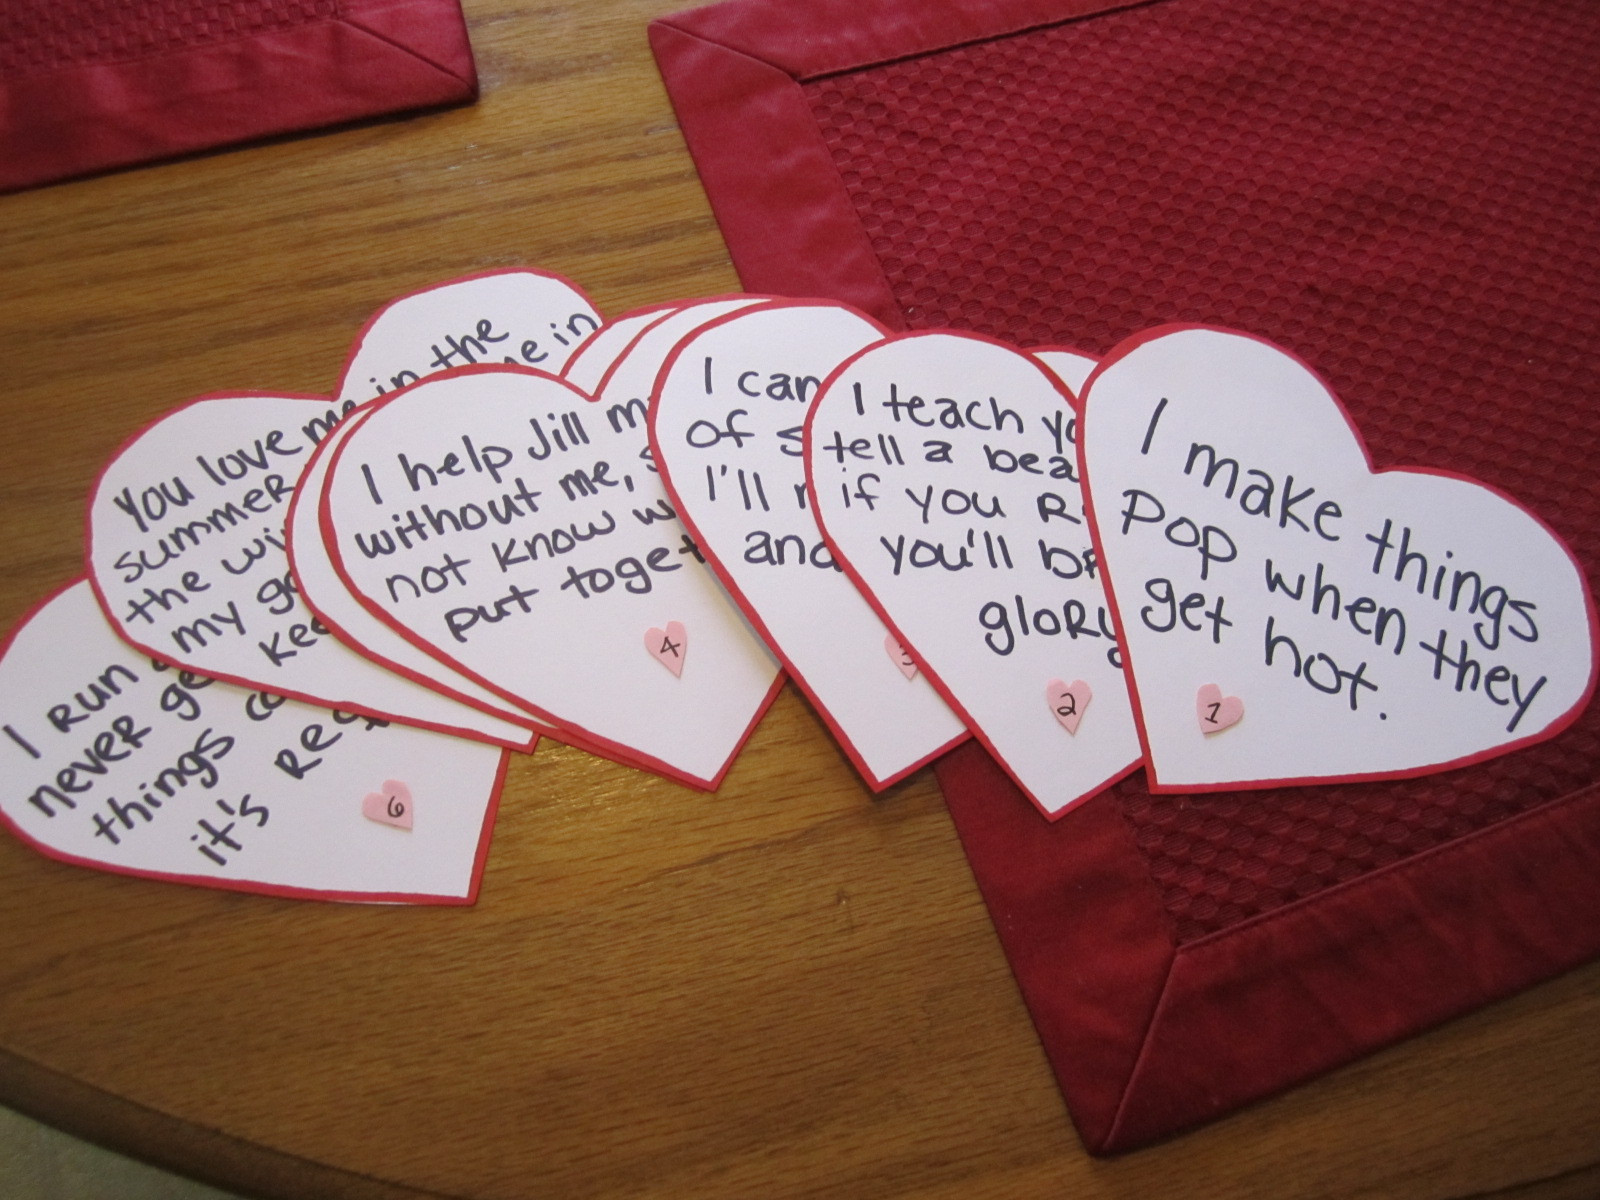 Homemade Valentine Gift Ideas Him
 Ten DIY Valentine’s Day Gifts for him and her